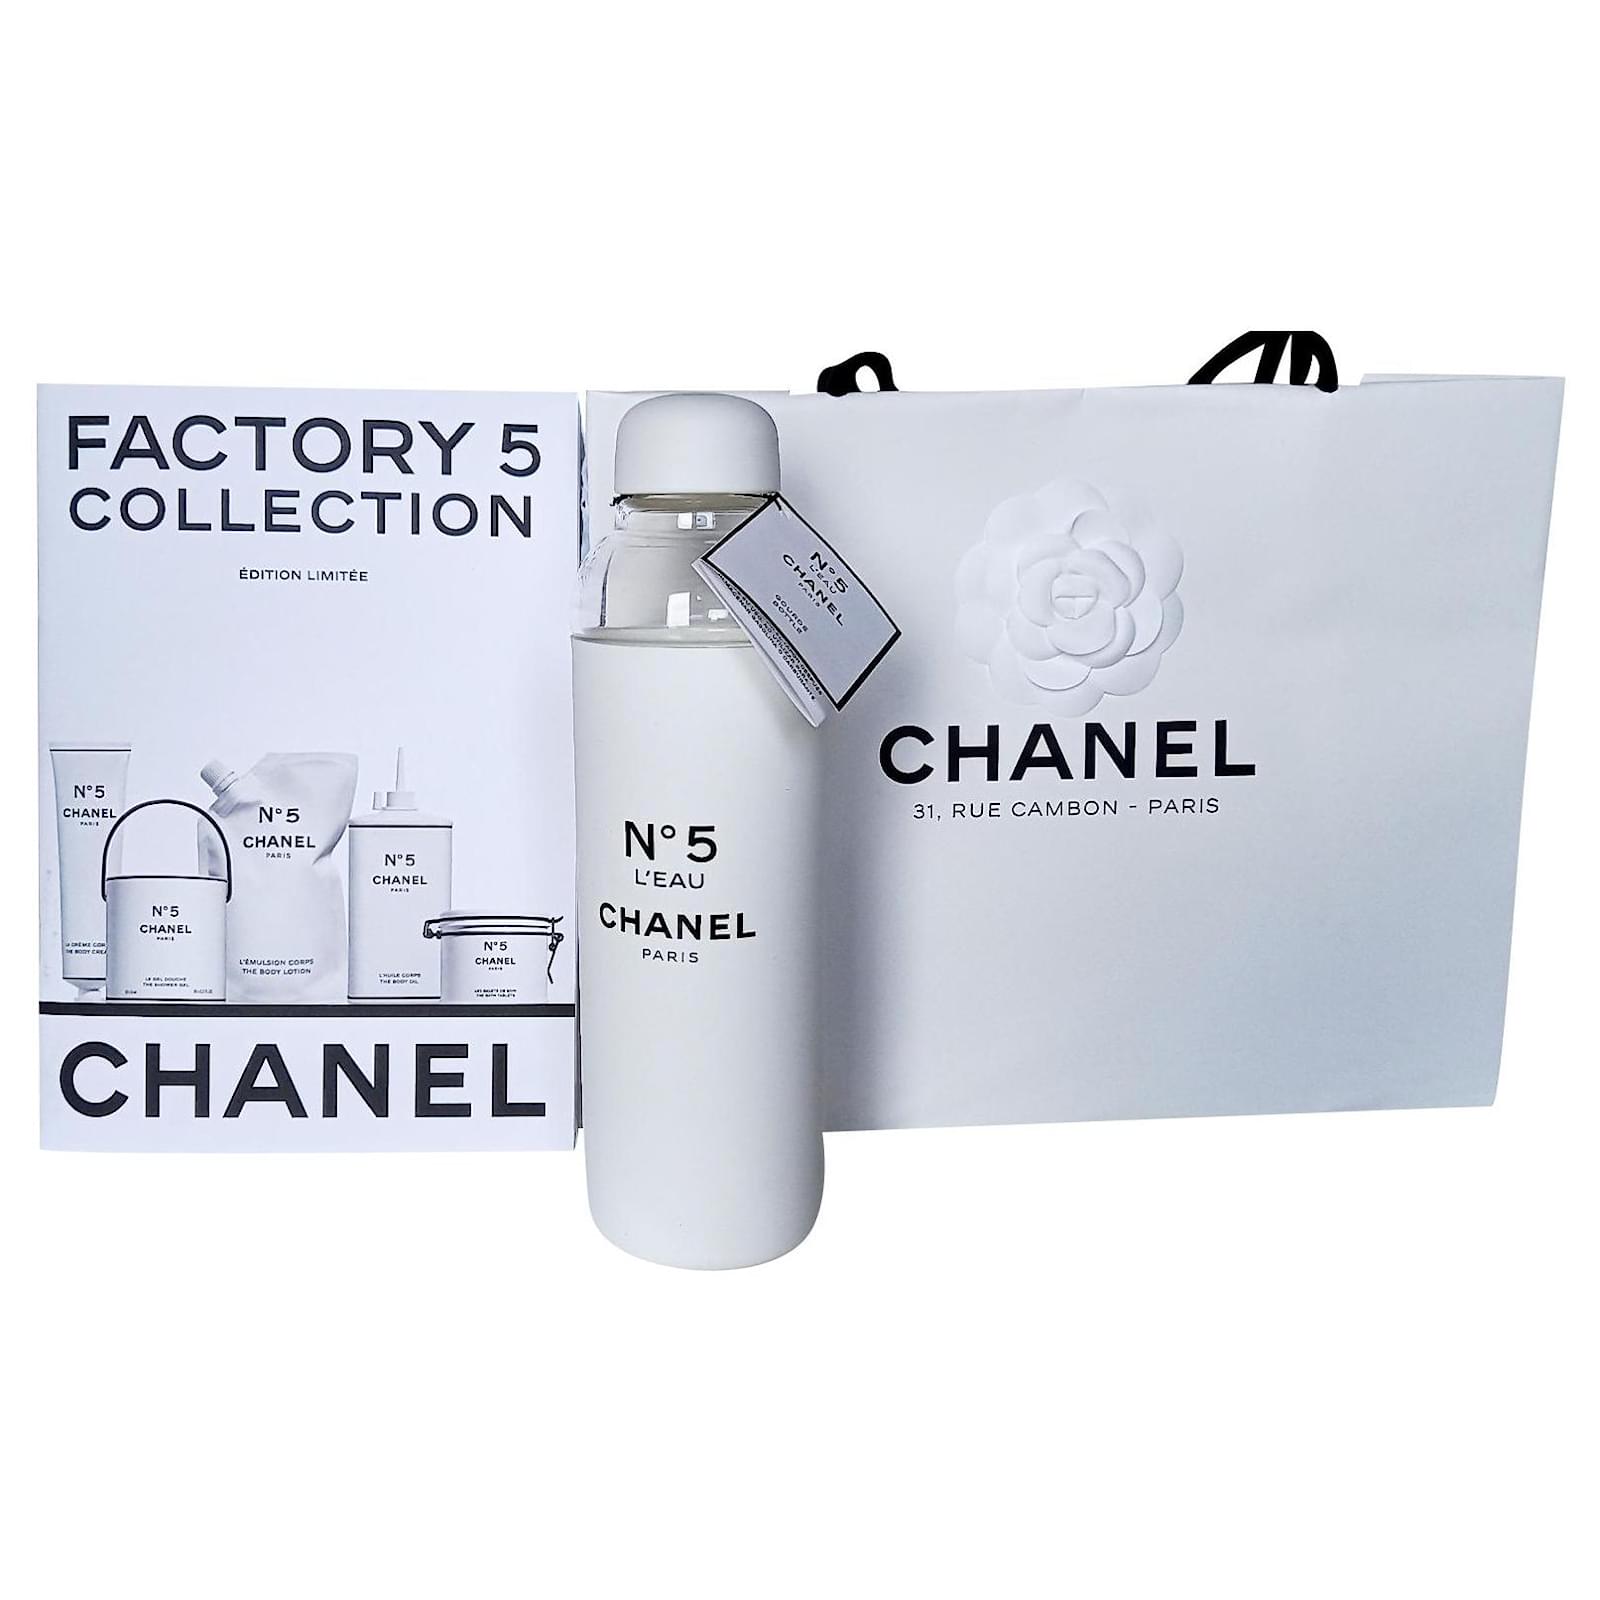 CHANEL FACTORY 5, factory